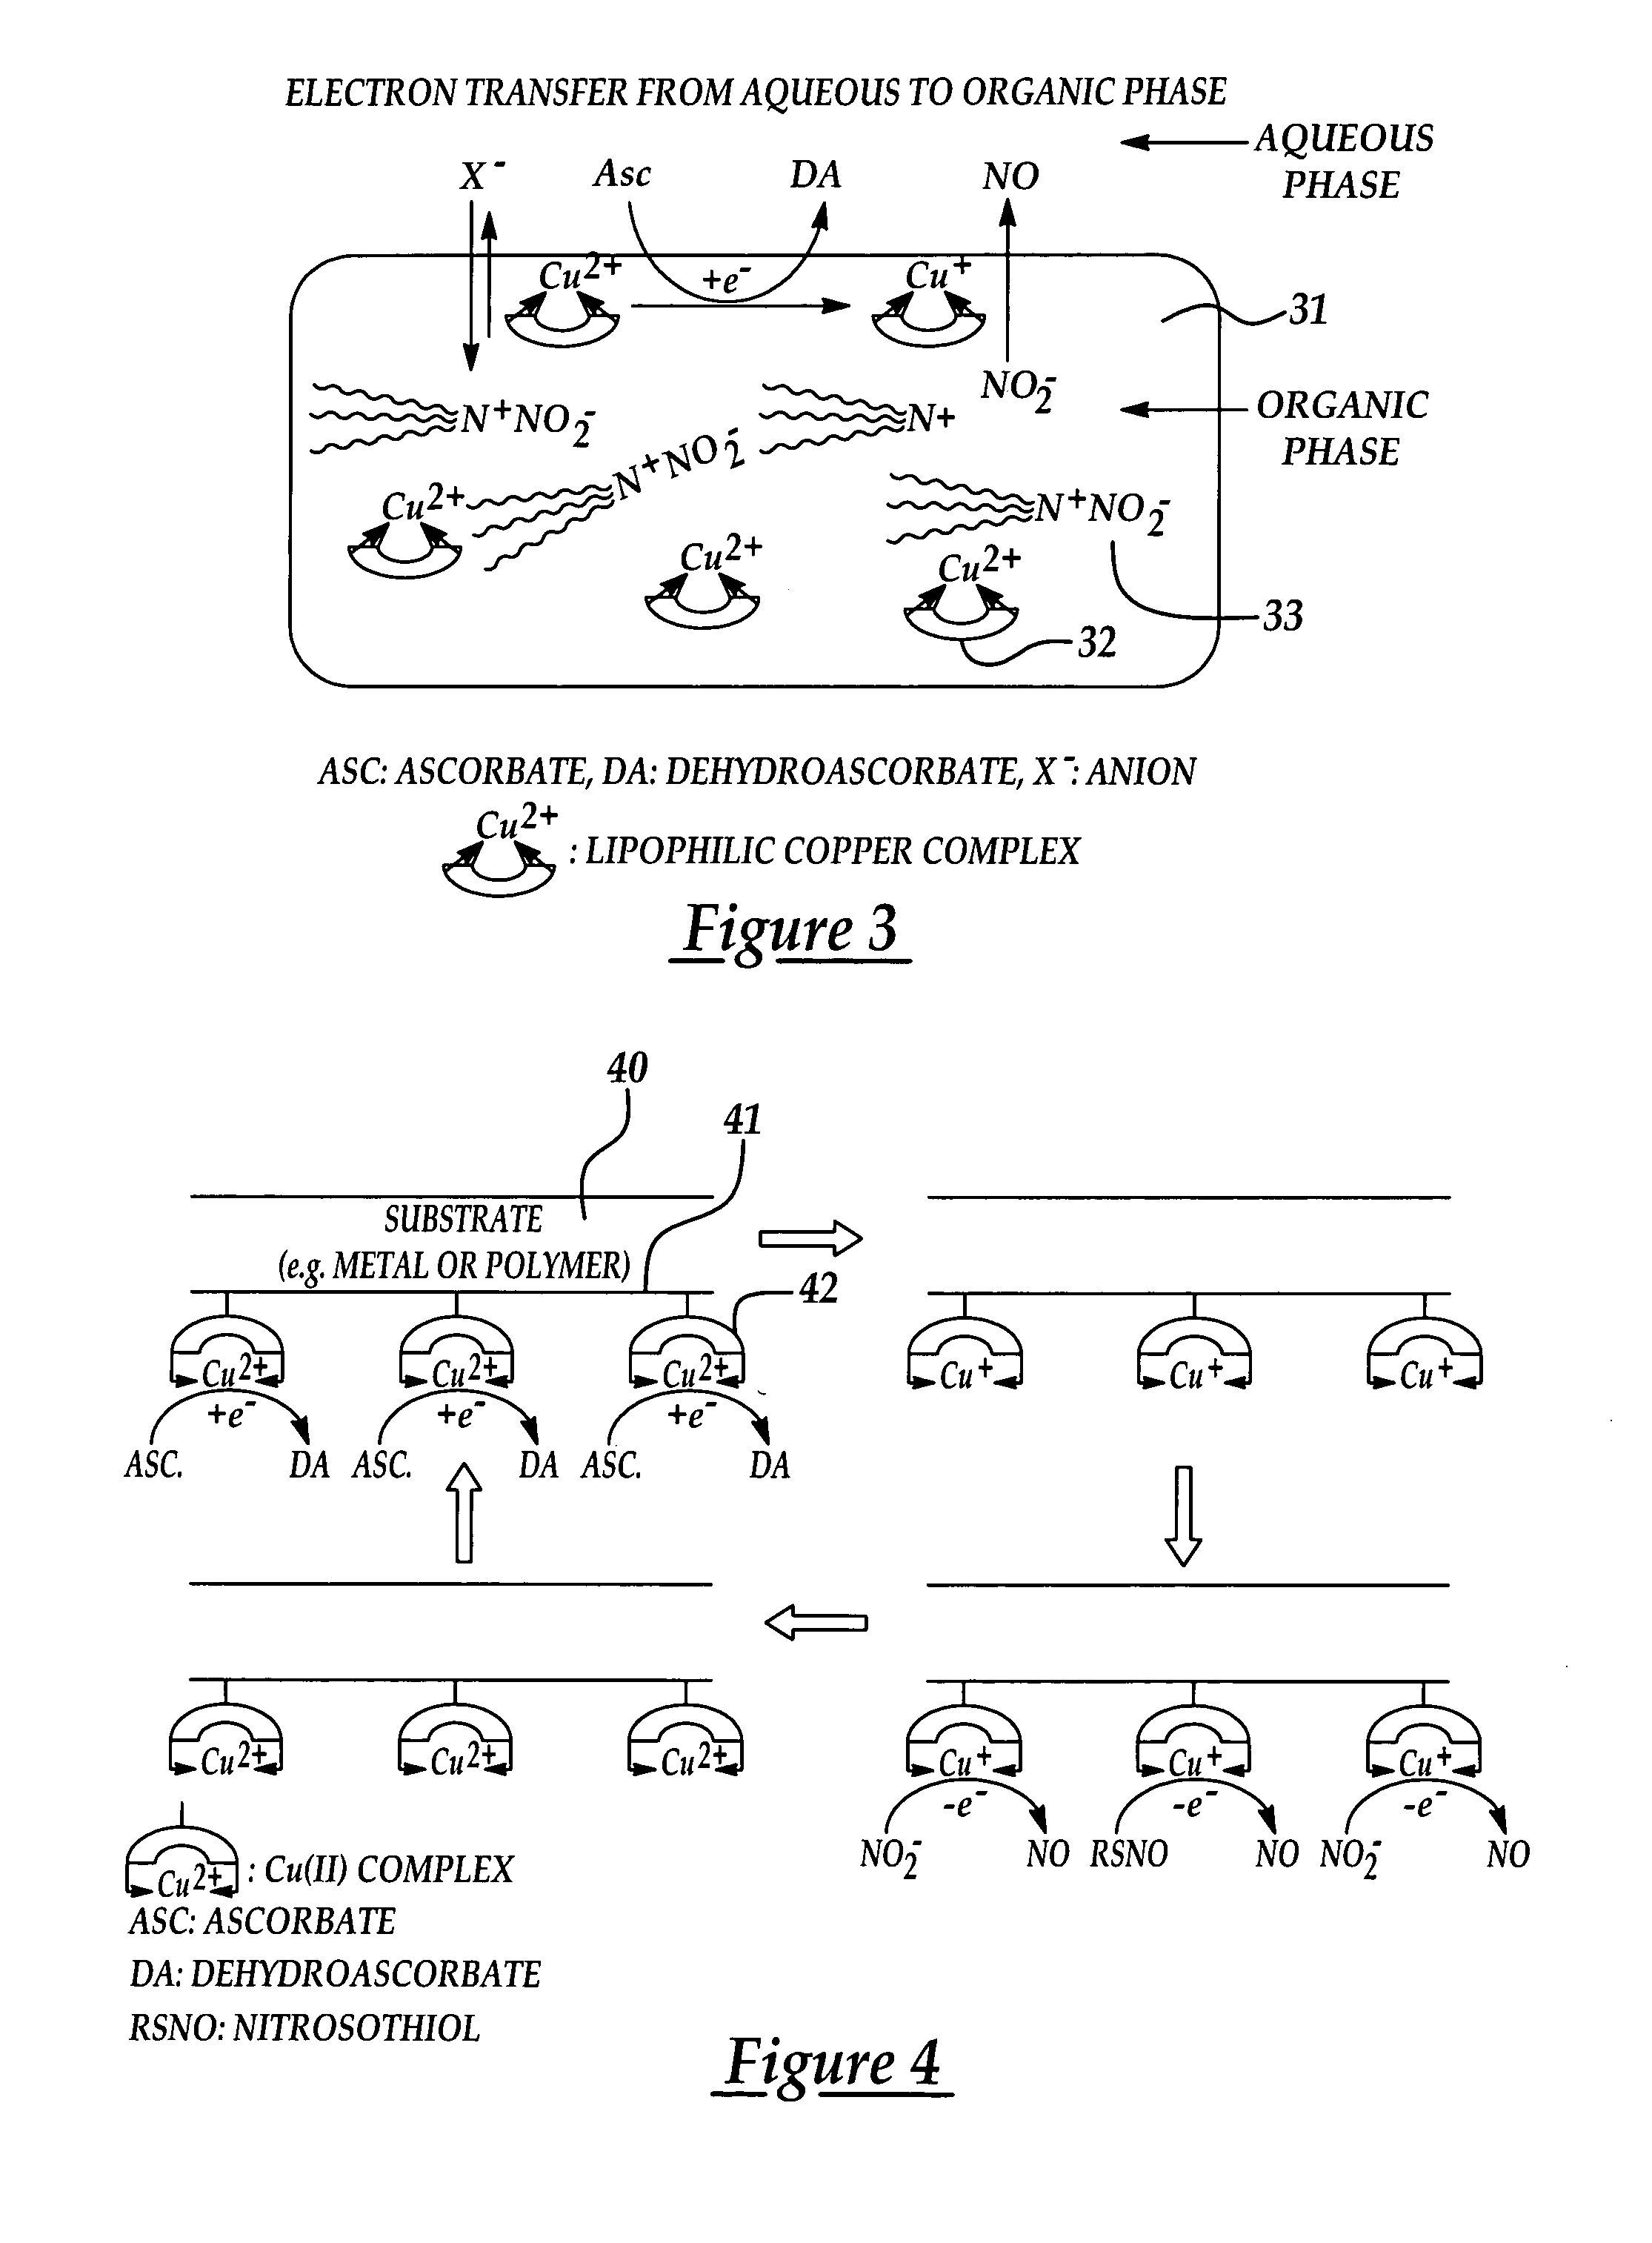 Material containing metal ion ligand complex producing nitric oxide in contact with blood